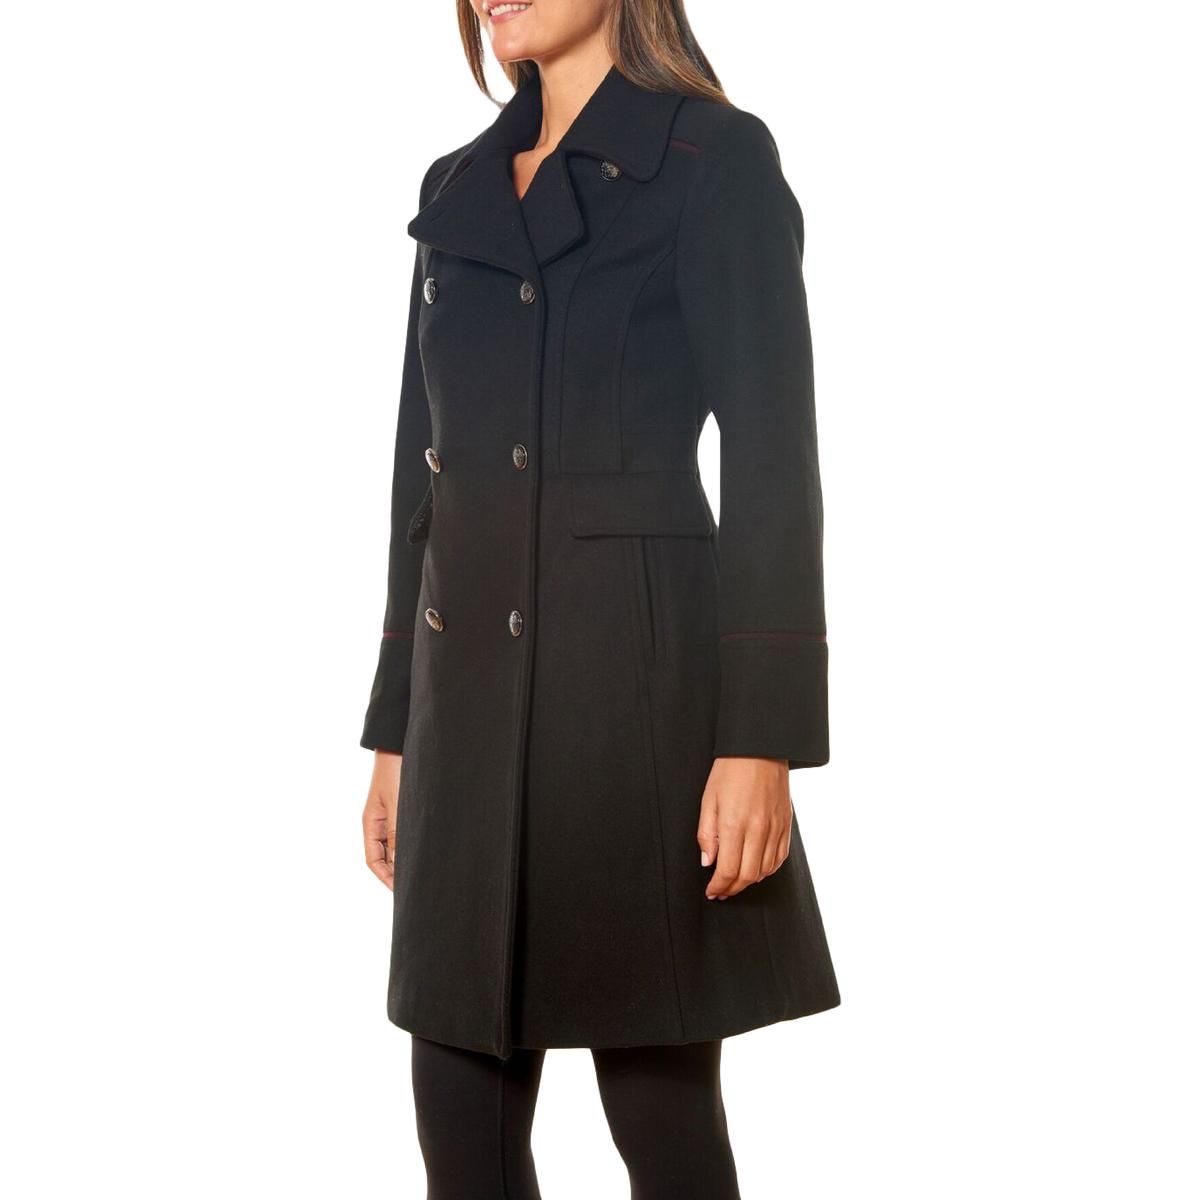 Vince Camuto Womens Wool Blend Double Breasted Wool Coat Outerwear